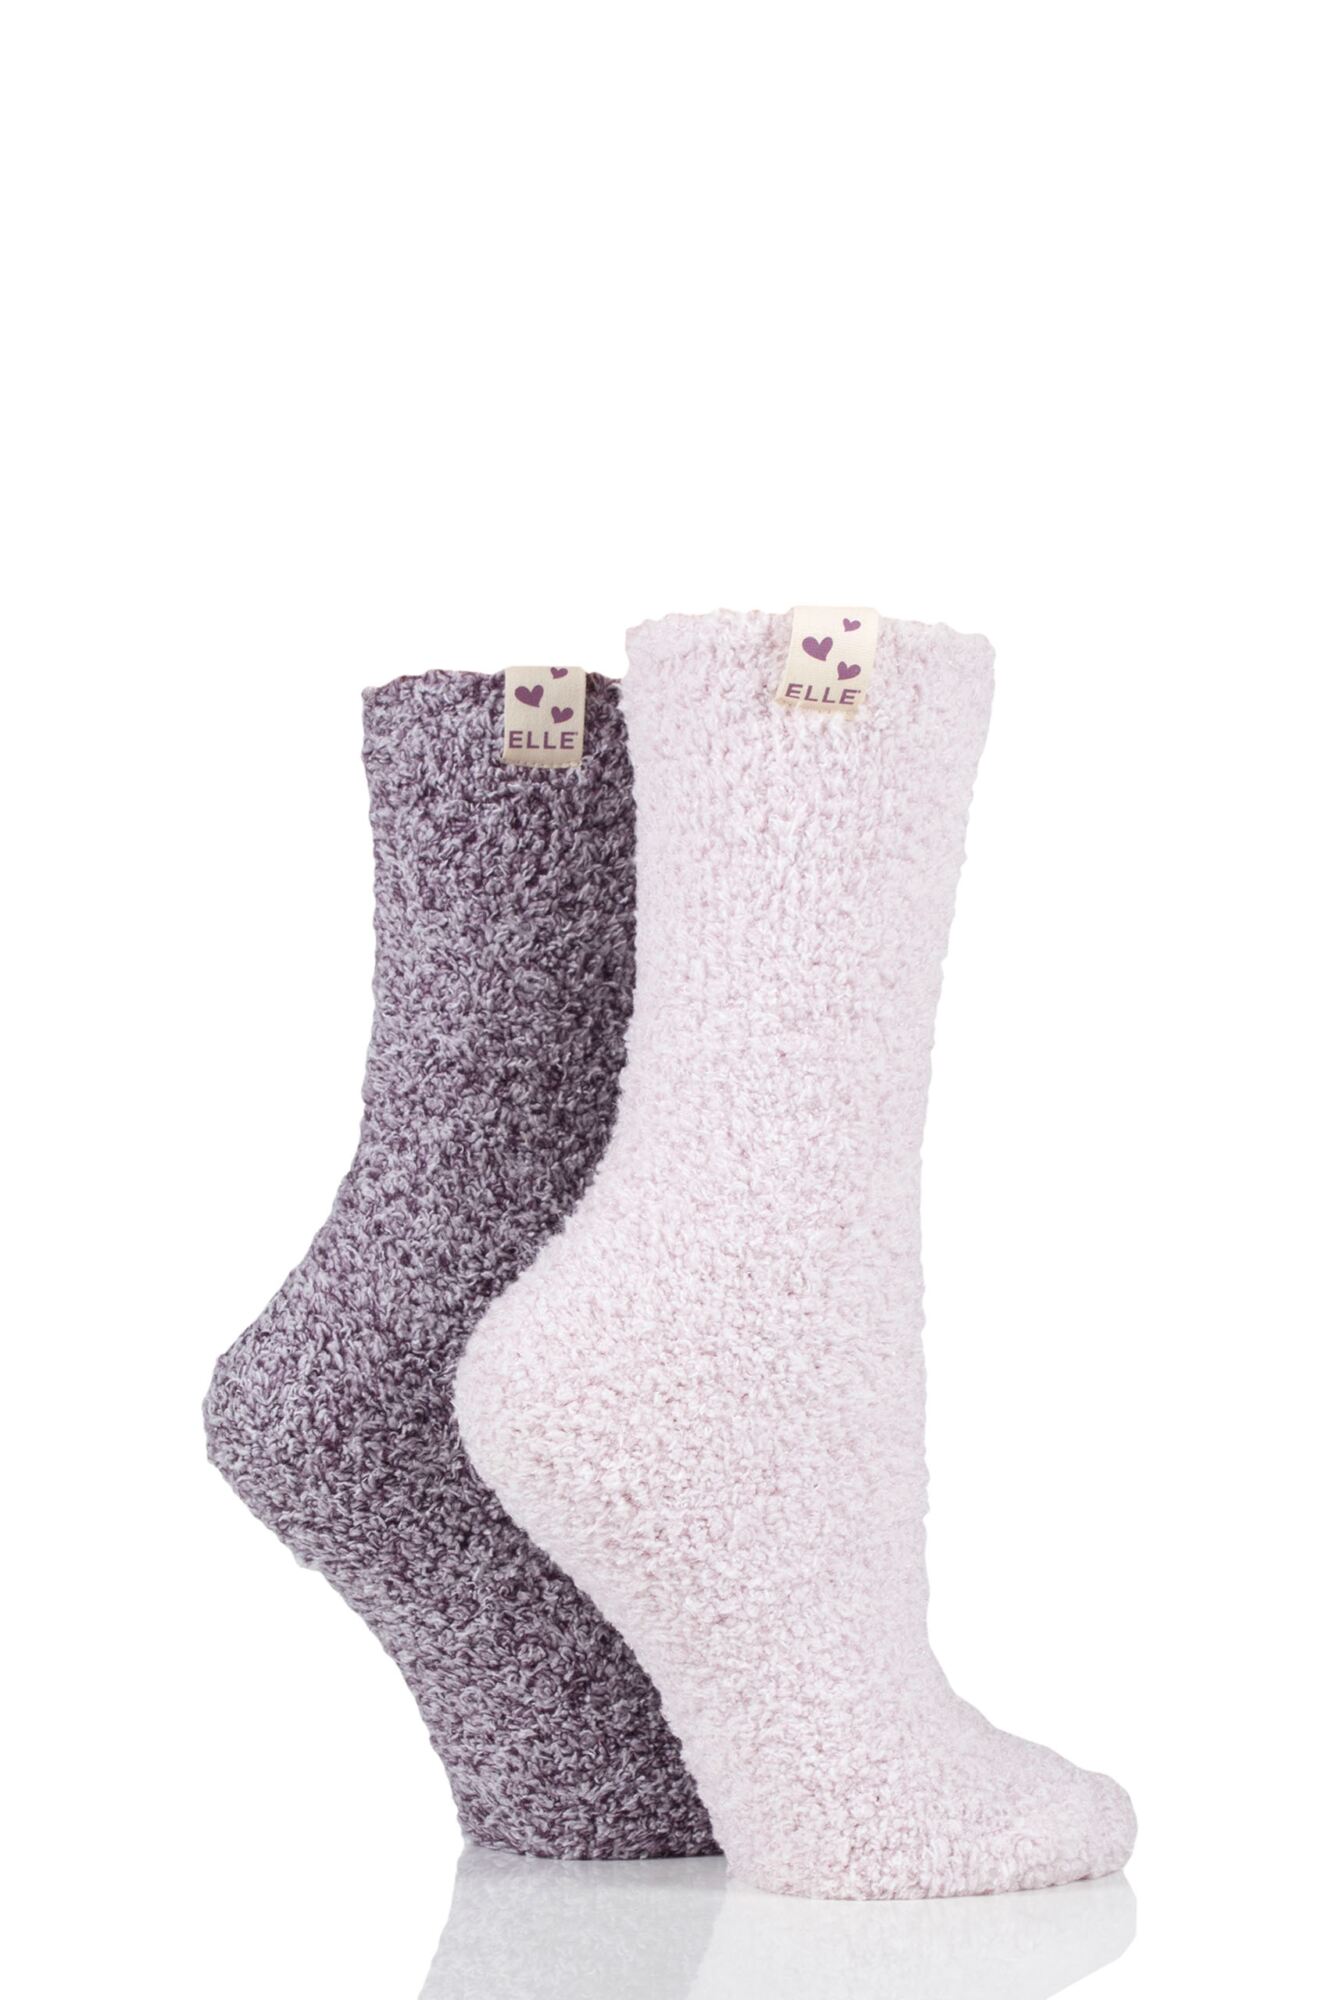 2 Pair Two Tone Soft and Cosy Bed Socks Ladies - Elle